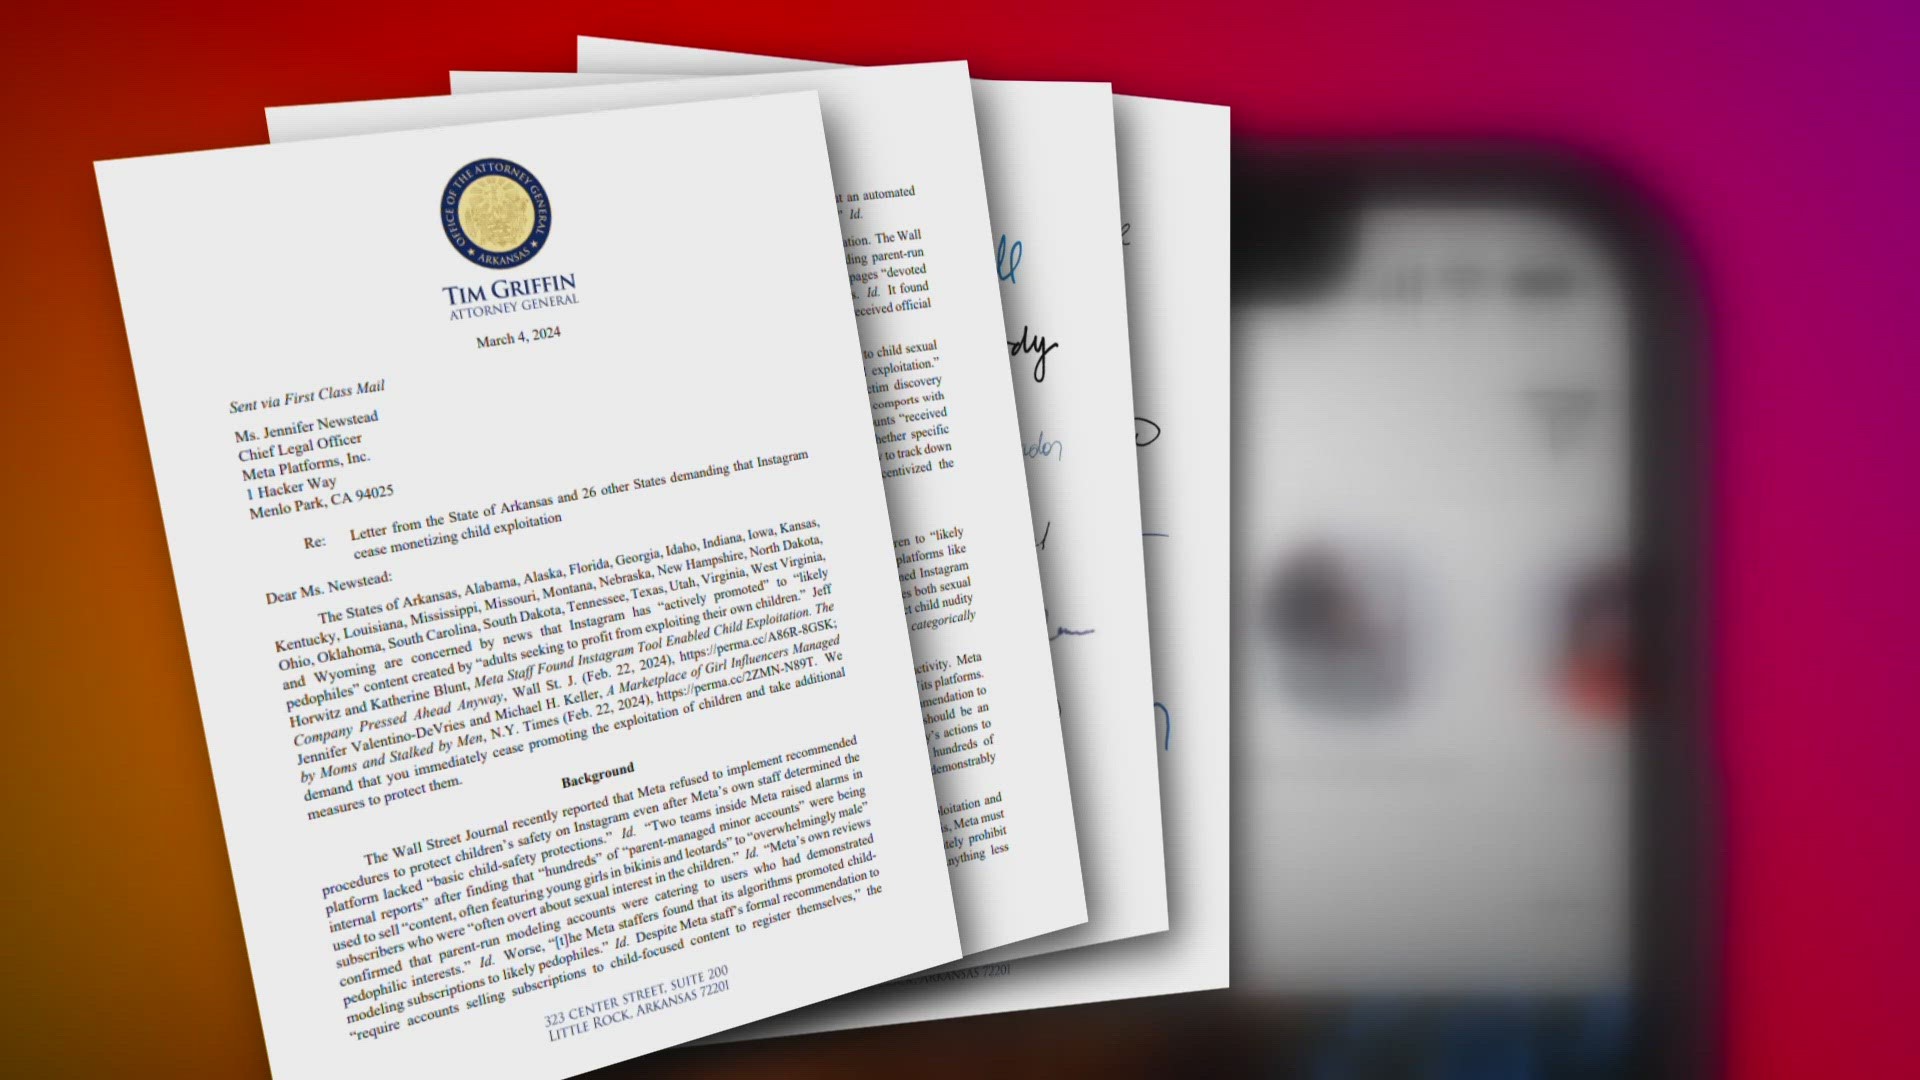 The letter has been signed by attorneys general from 27 different states.